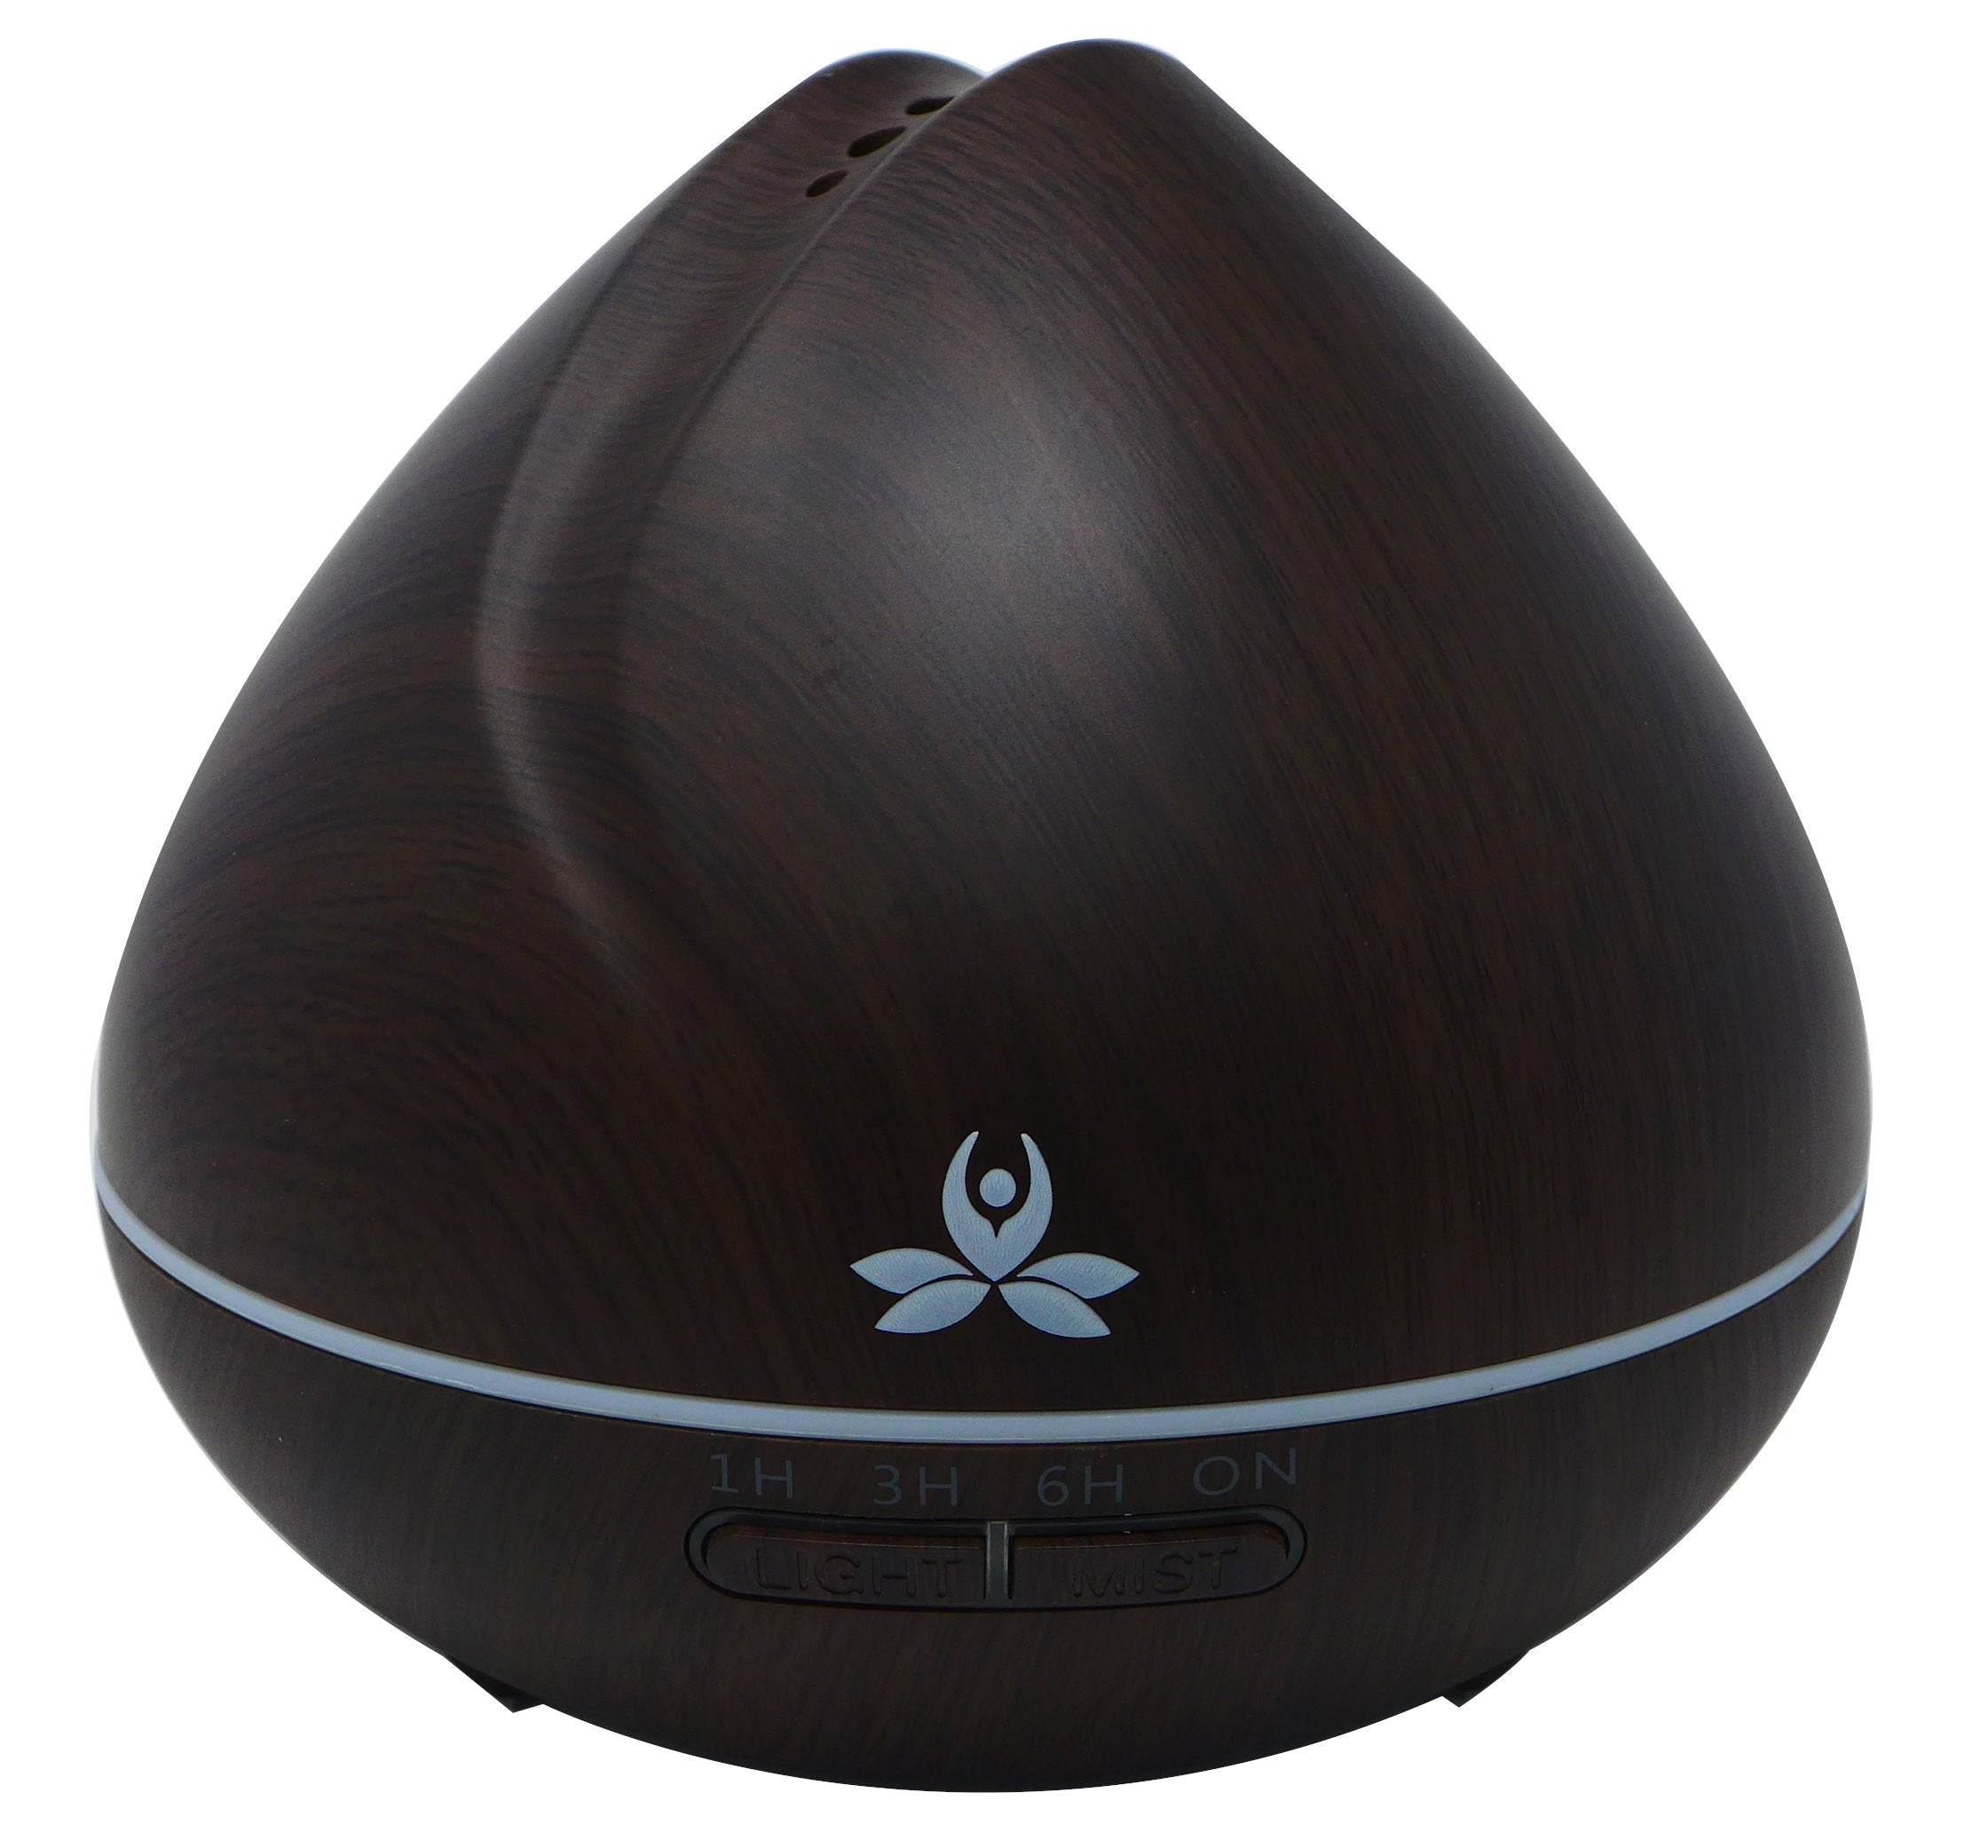 Portable Aromatherapy Diffuser (Yatra) Electronic Diffuser Dark brown 500ml with Bluetooth speaker 